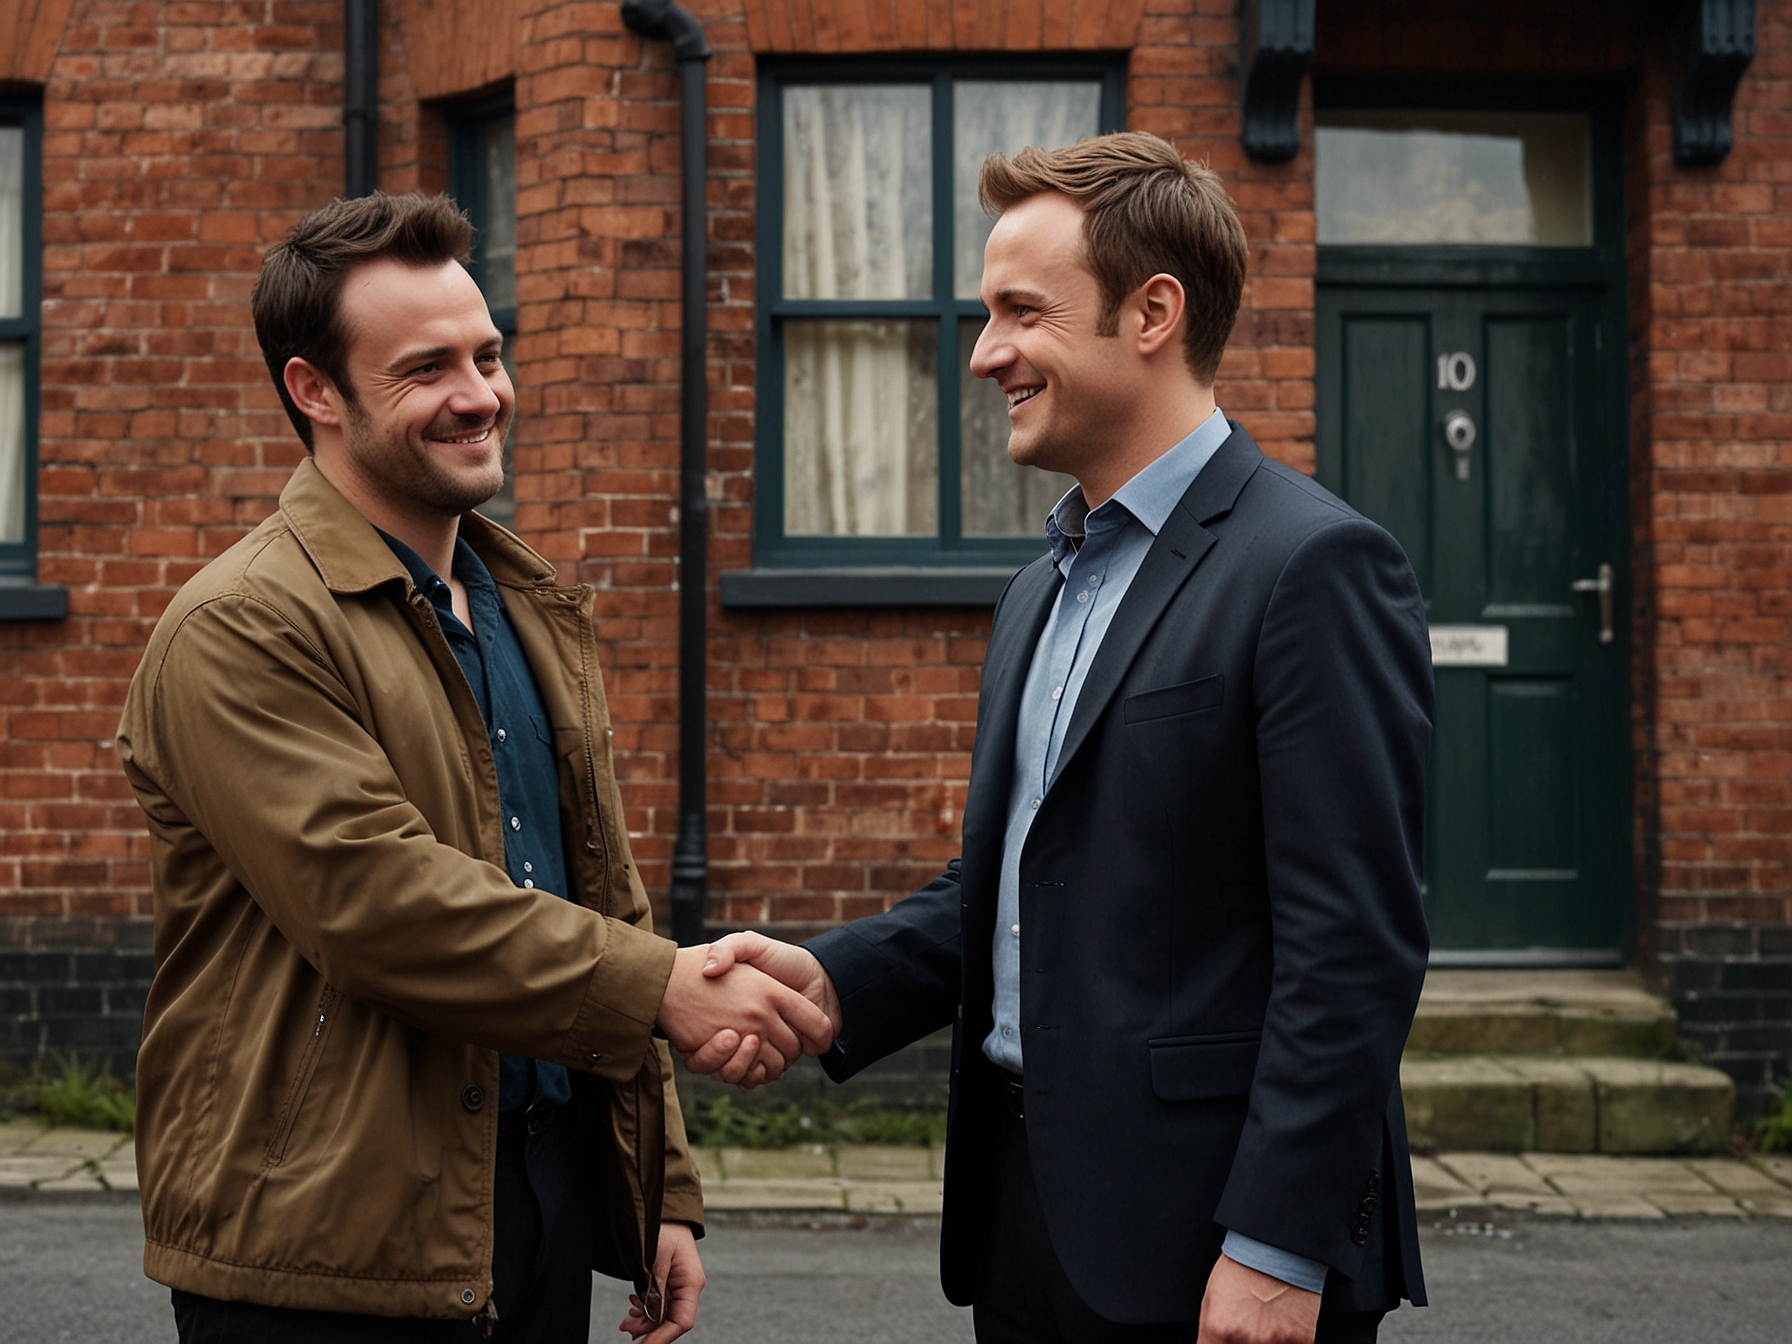 Joel, with a sinister smile, shakes hands with an unsuspecting new character in Coronation Street, hinting at his dark intentions and the impending danger.